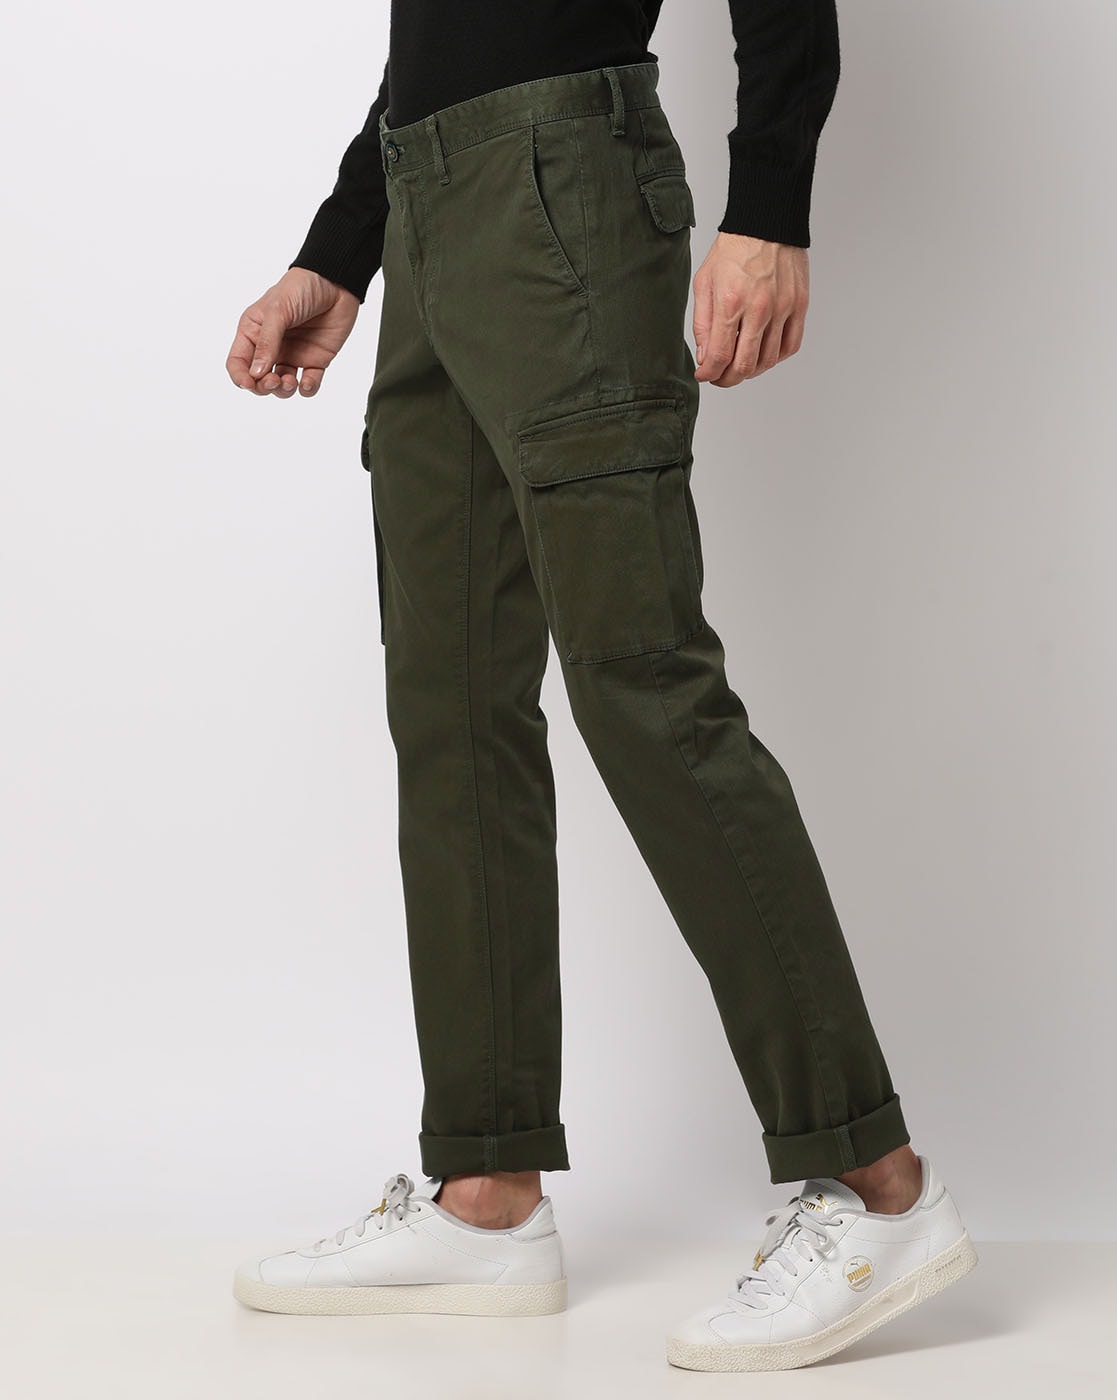 indian terrain corduroy trousers review I corduroy trousers I indian terrain  brooklyn fit trousers  YouTube